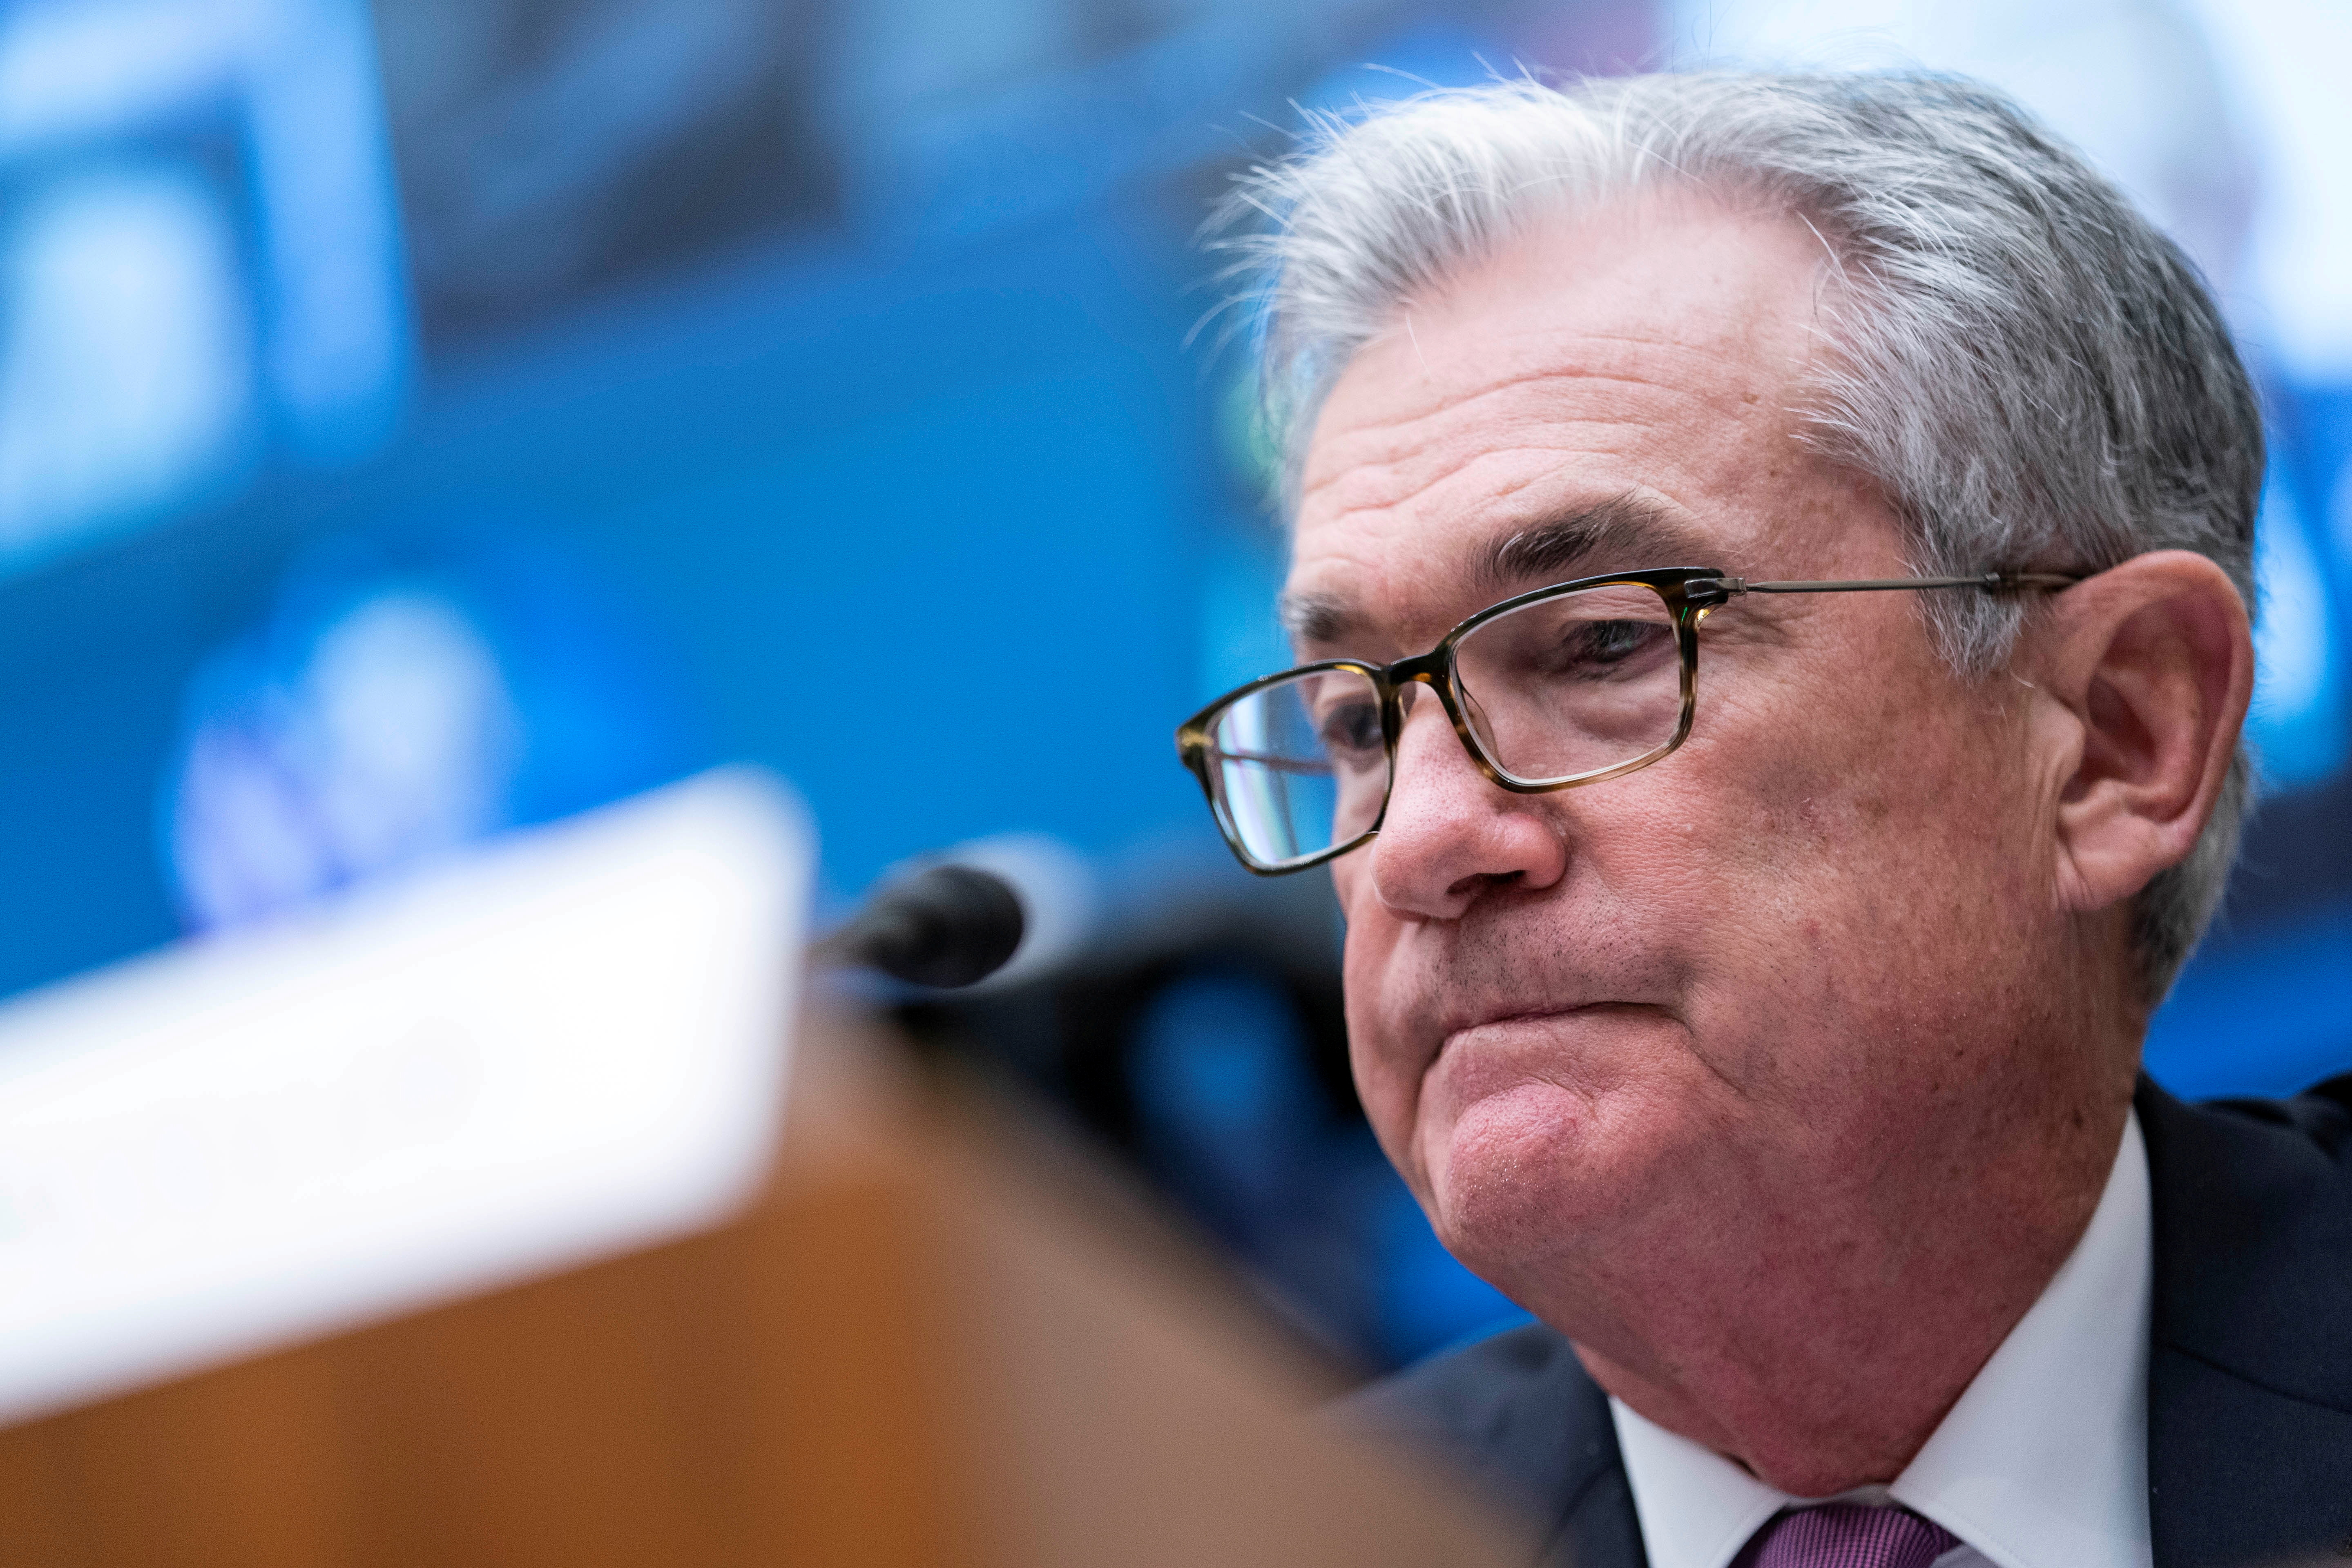 Federal Reserve Chair Powell testifies during the House Financial Services Committee hearing in Washington